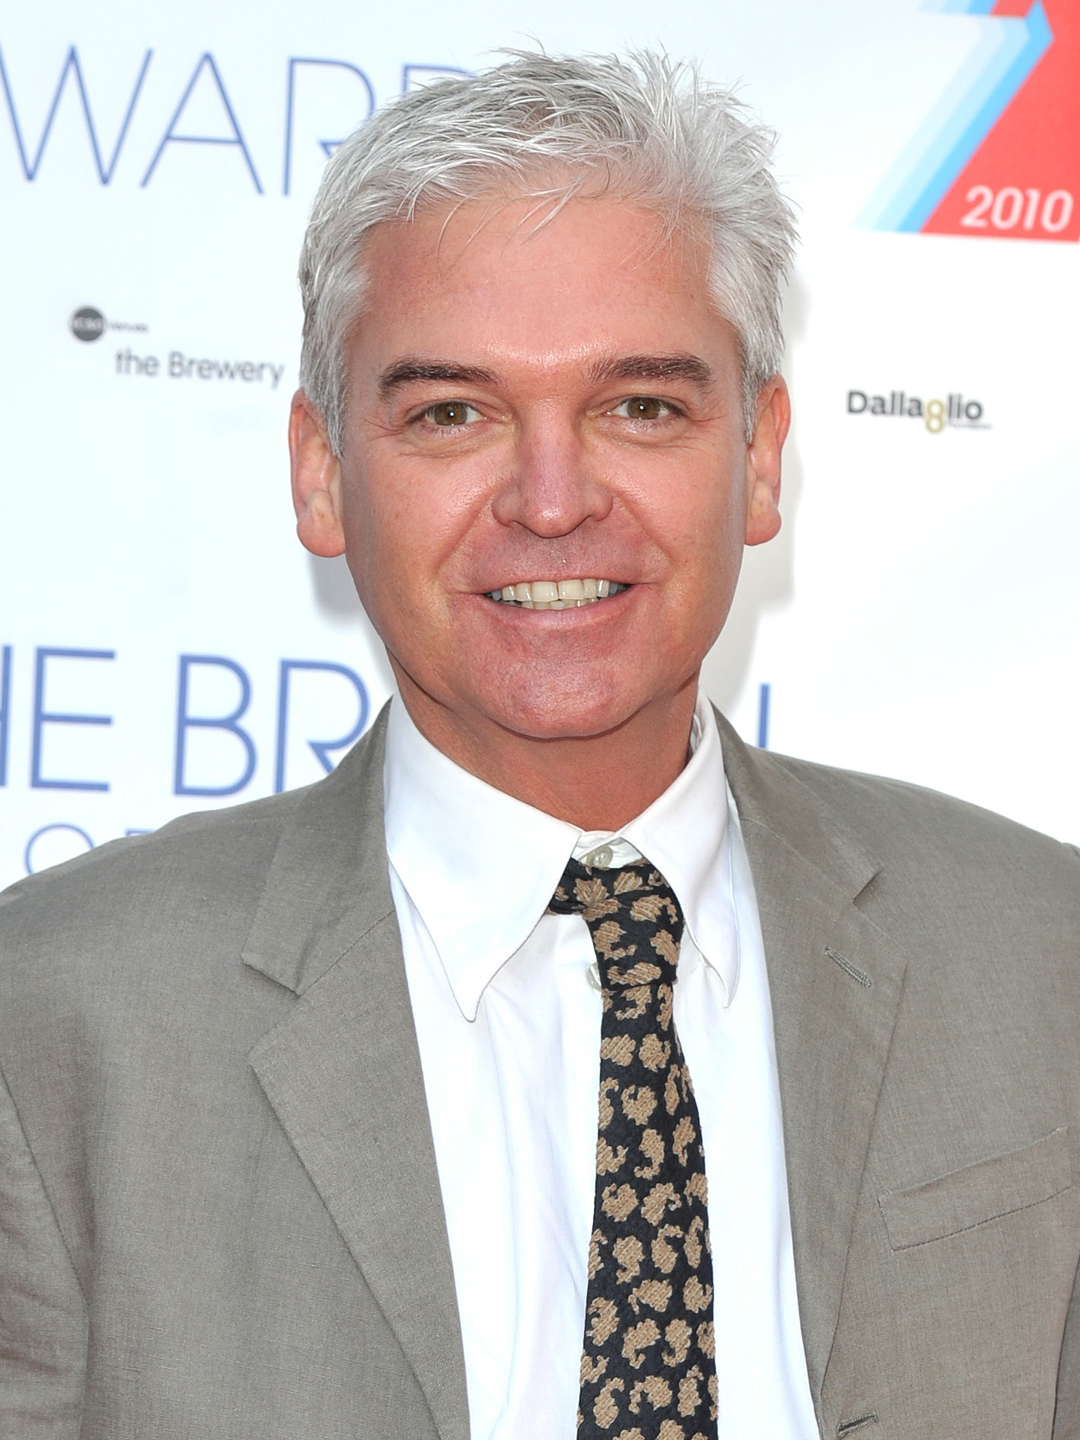 How tall is Phillip Schofield?